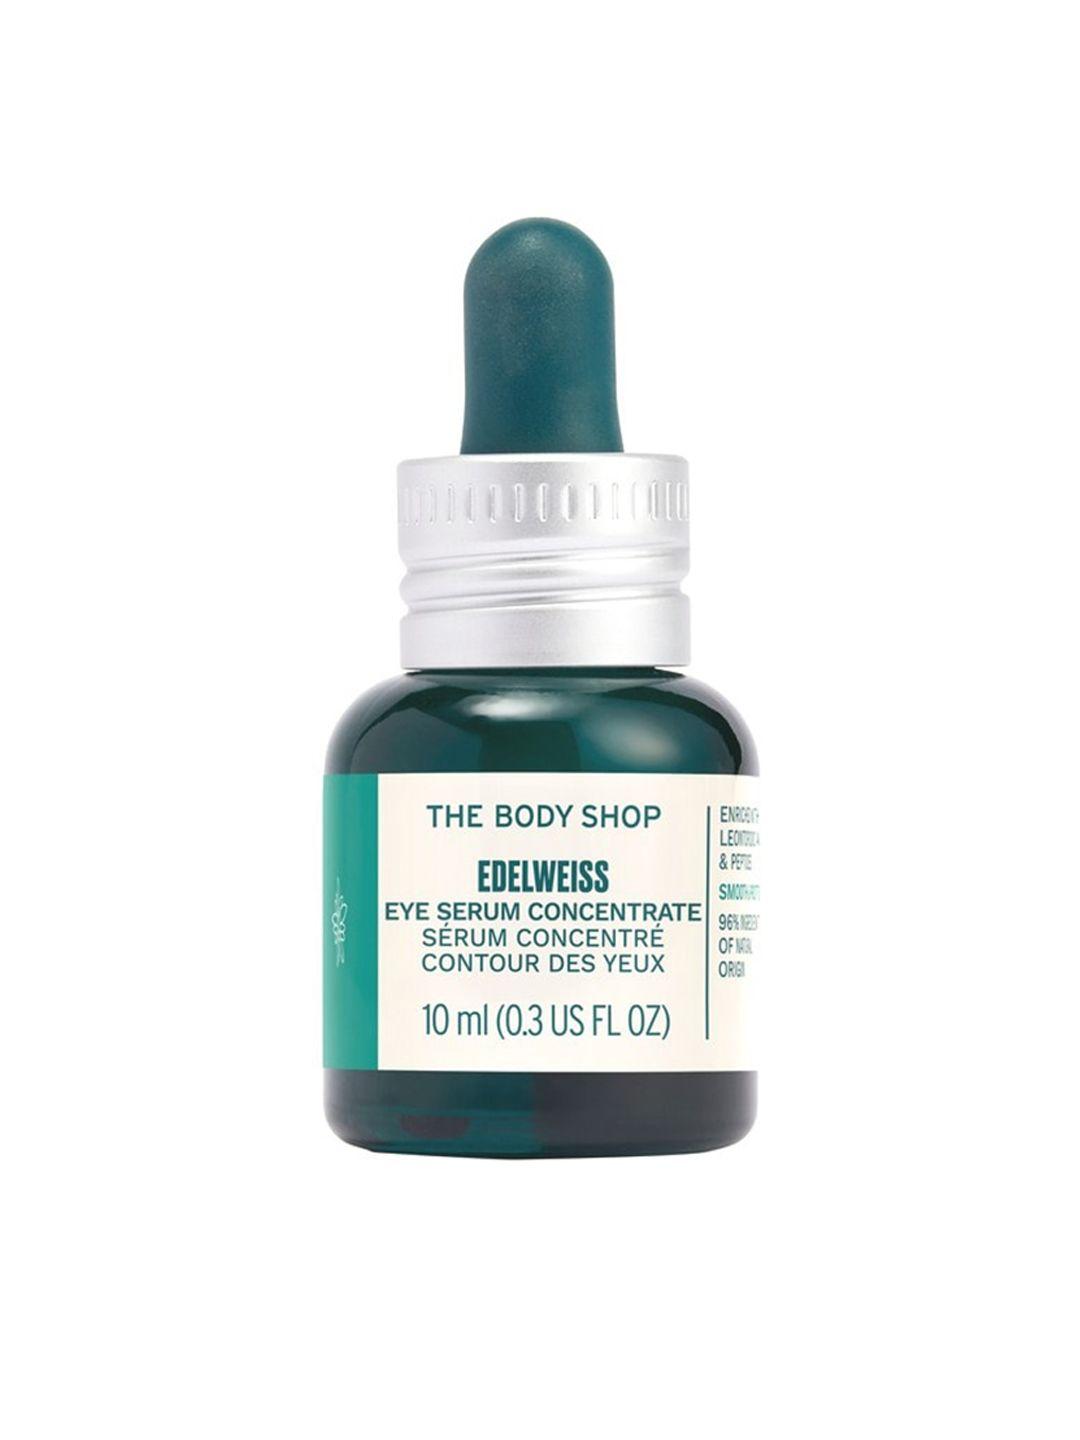 the body shop unisex edelweiss eye serum concentrate 10 ml